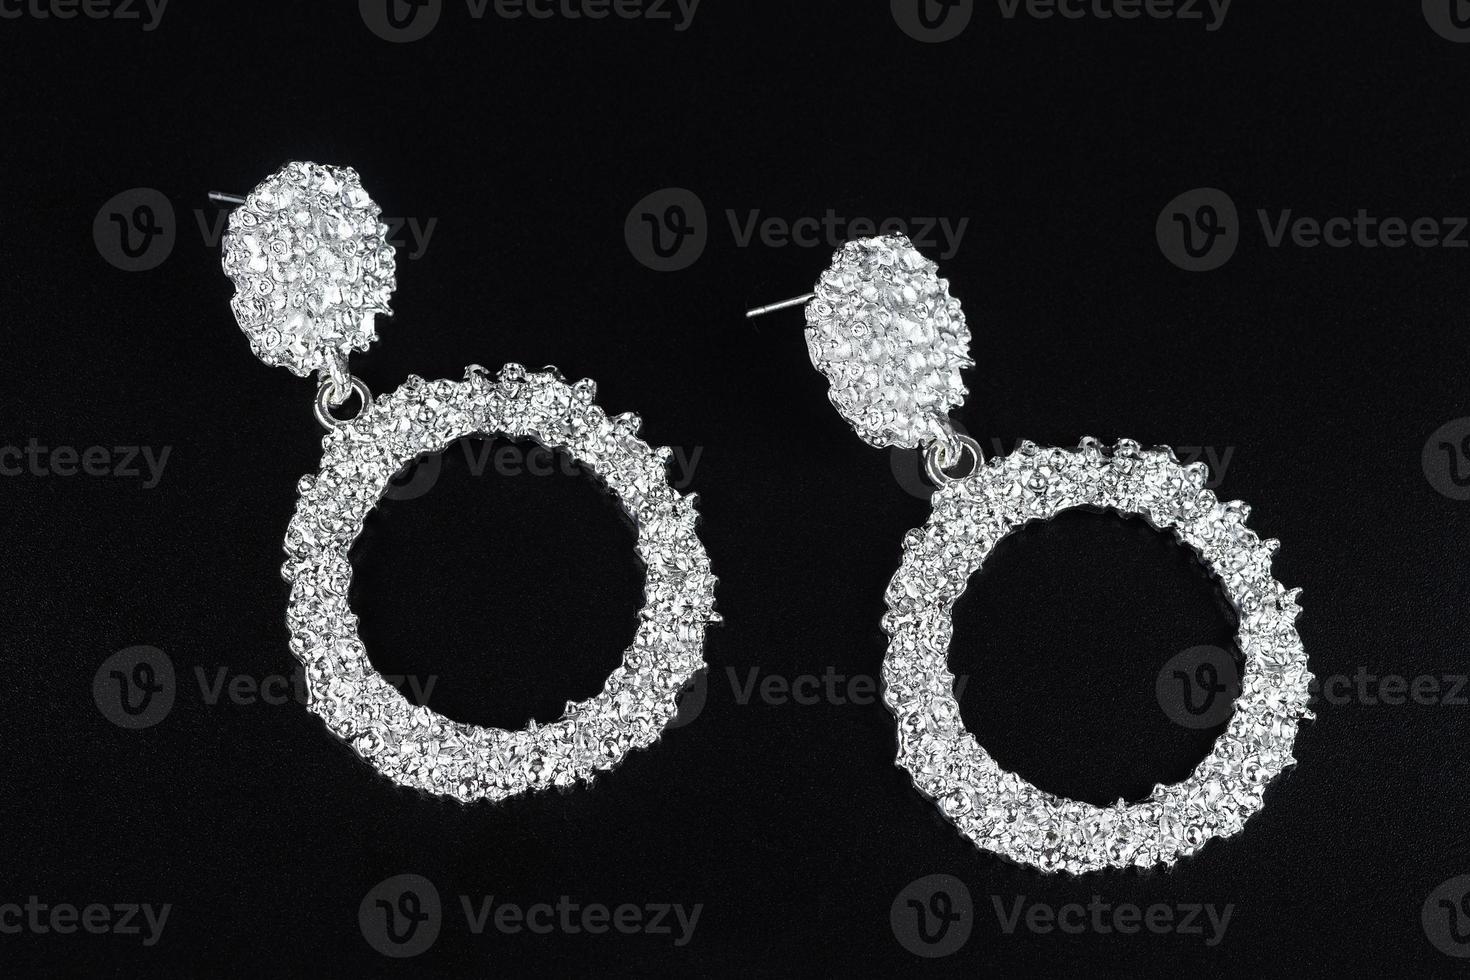 Jewelry earrings and costume jewelry on a black background photo